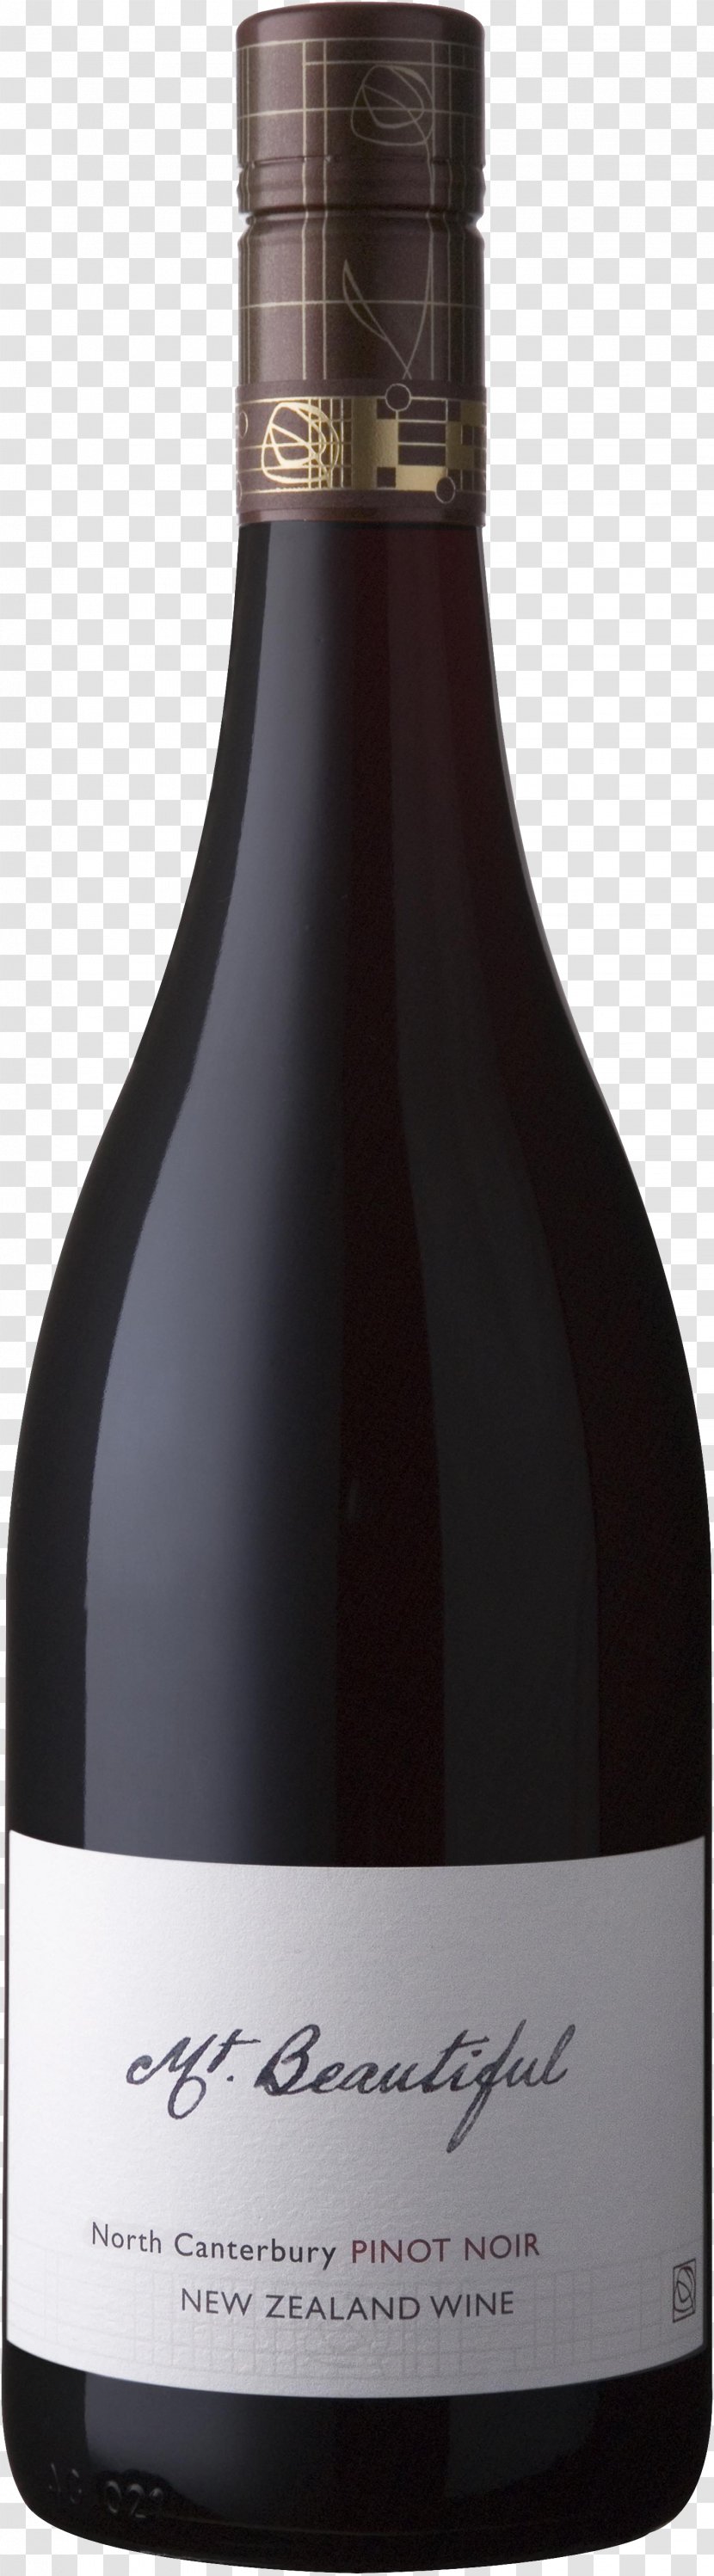 Champagne Pinot Noir Sauvignon Blanc Cabernet Wine - Mt Beautiful Two Rivers Cafe Tasting Room - Shot Transparent PNG